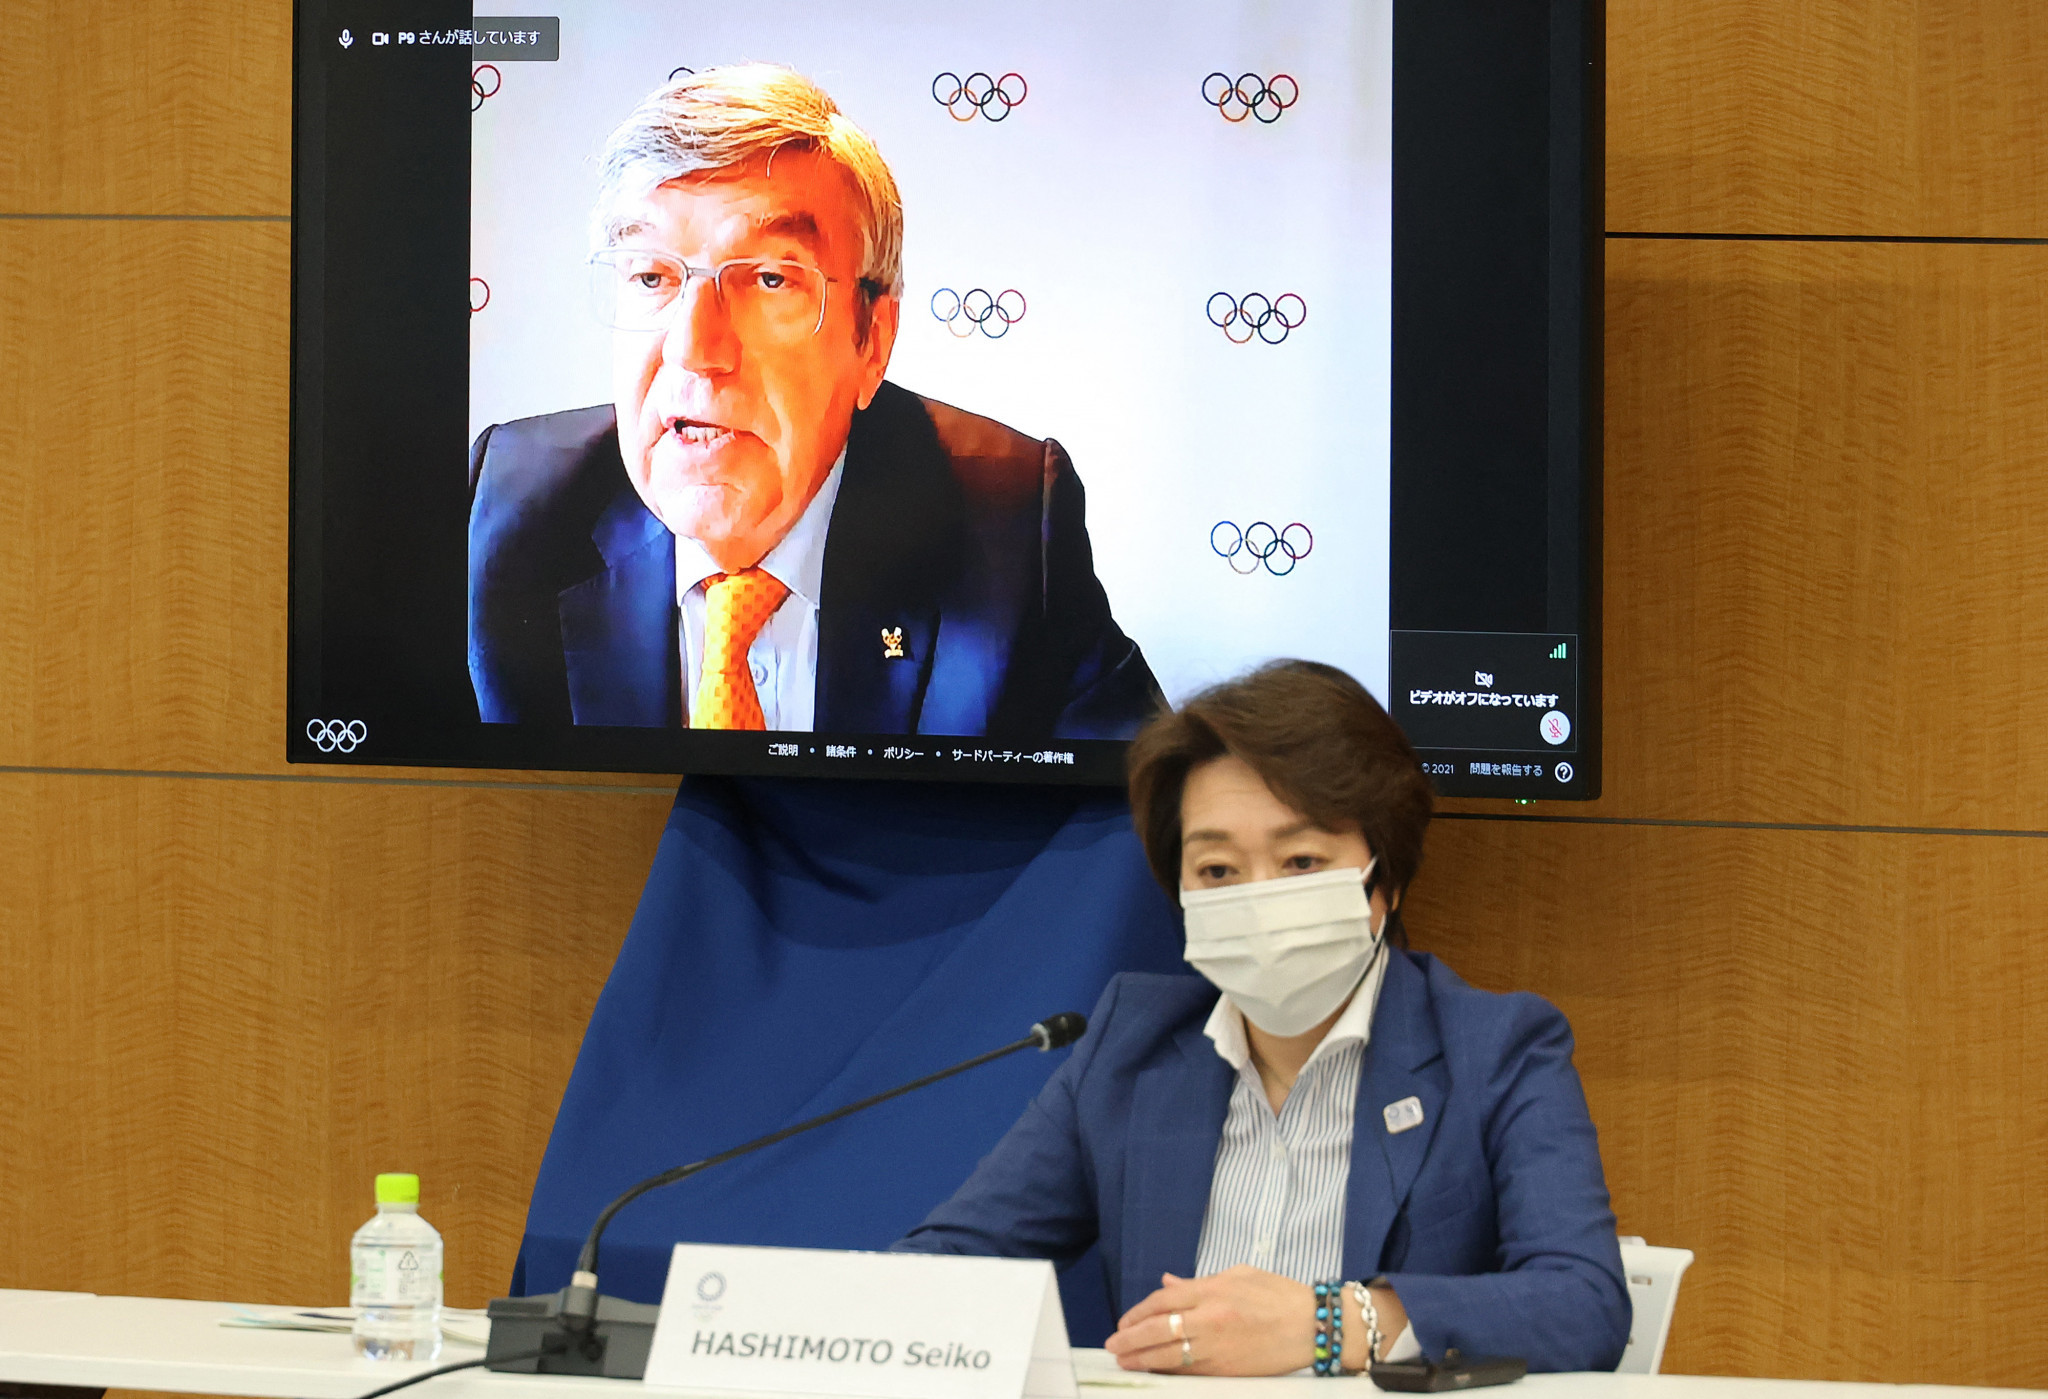 Bach not planning pre-Olympics visit to Tokyo this month